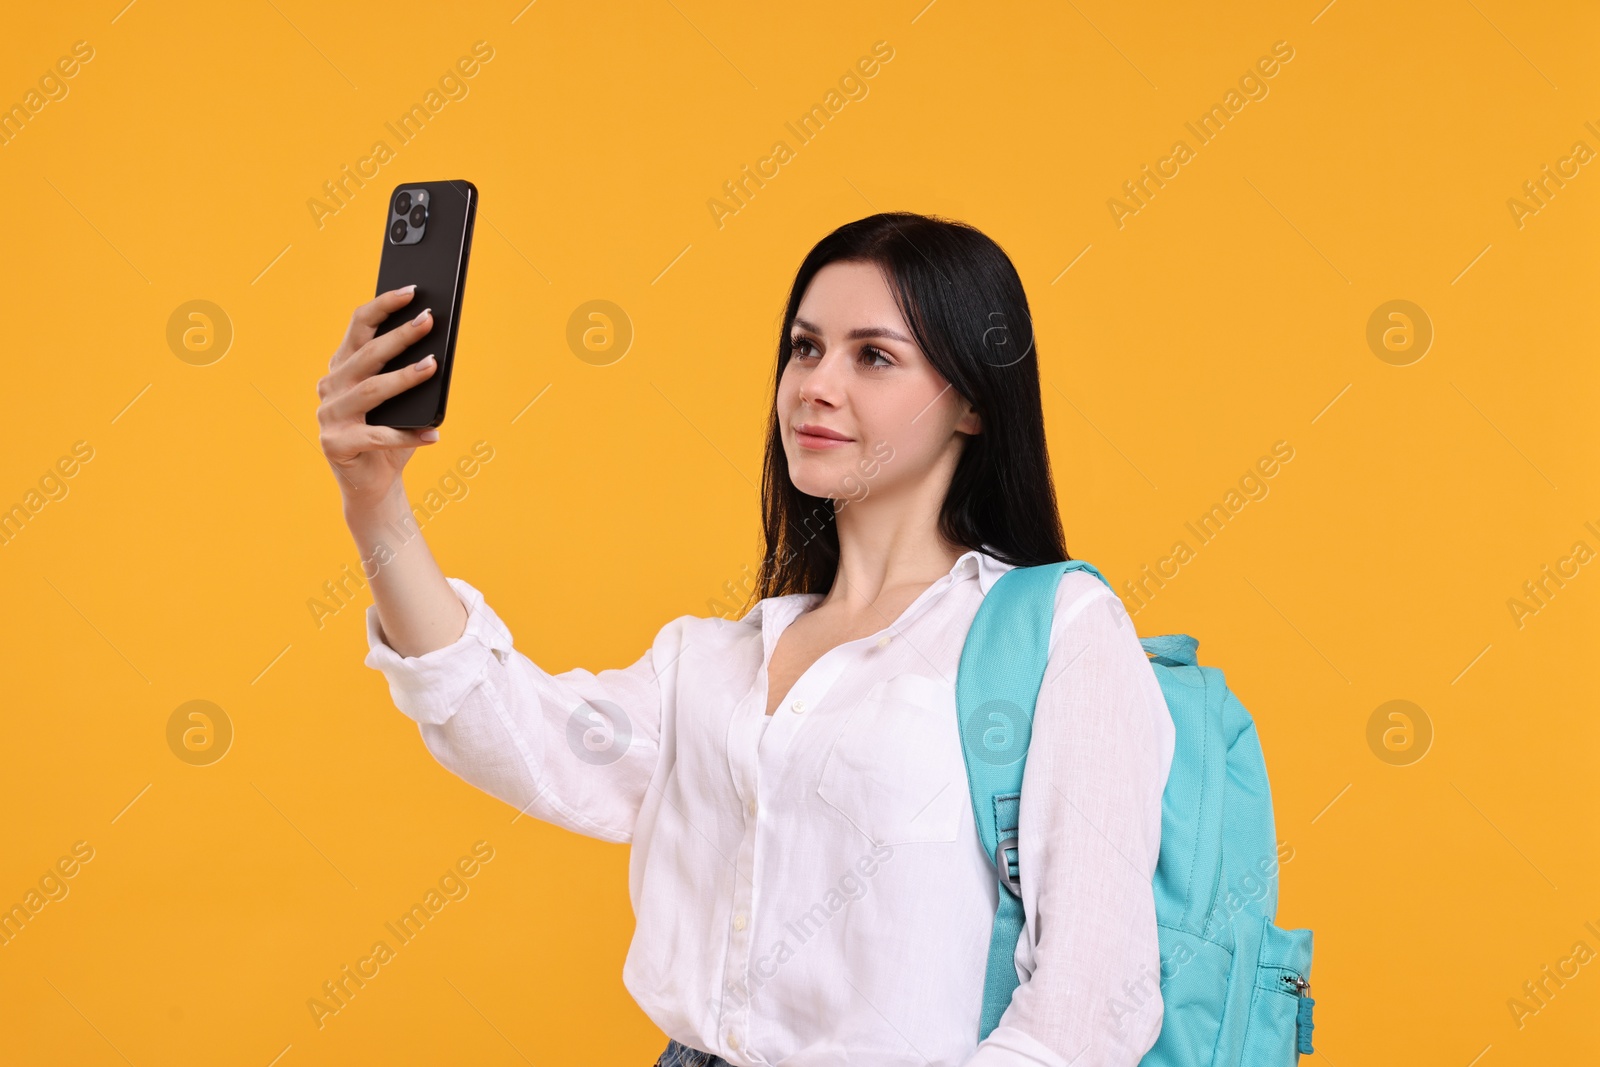 Photo of Student with backpack taking selfie on yellow background